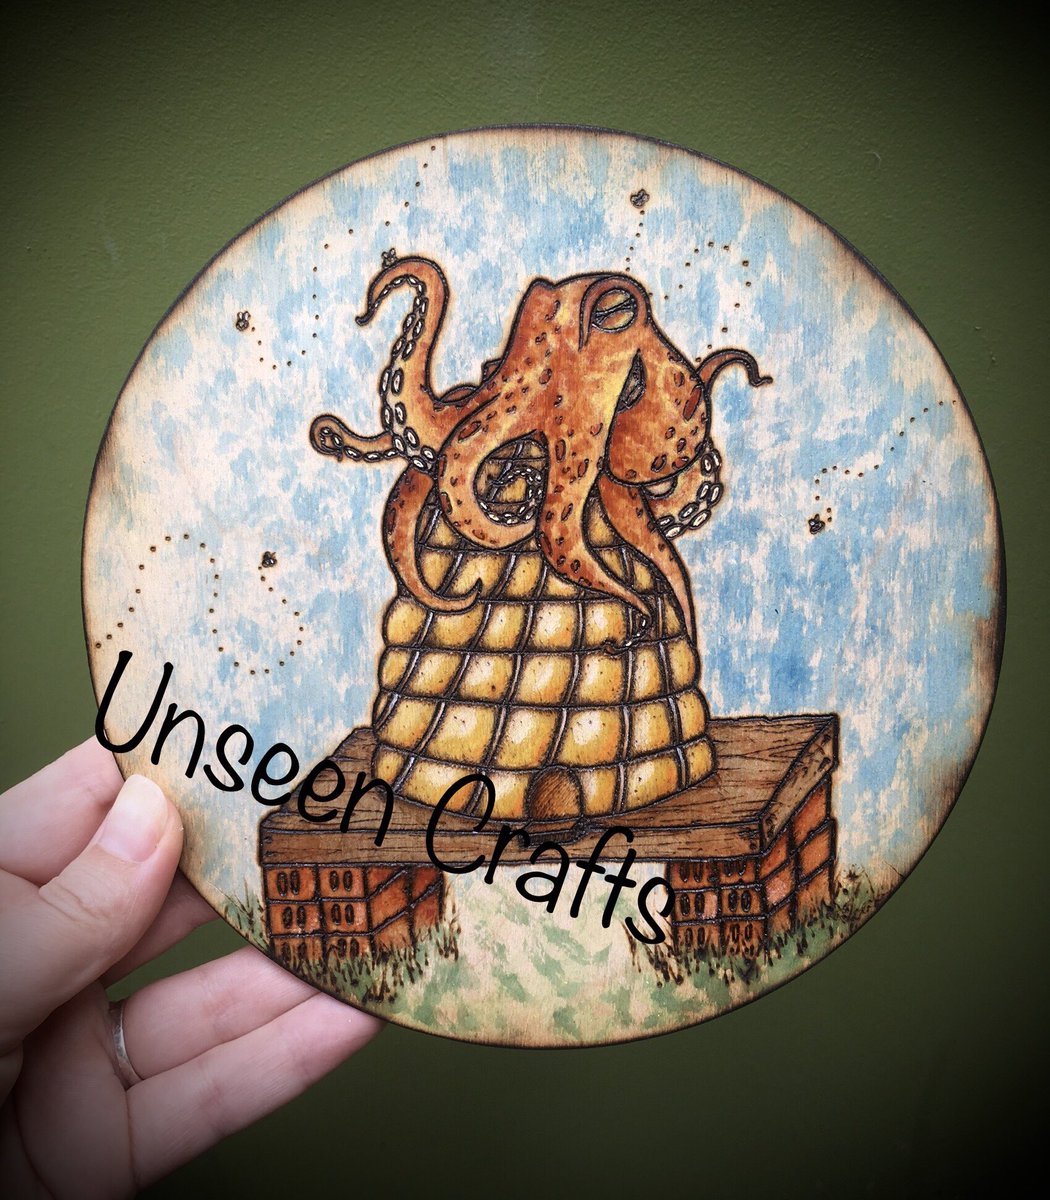 These are the only octopodes available right. Original Unseen designs, hand burned onto the wood & hand painted colours. Details on my profile here & Facebook & Instagram.
#art #craft #Octopuses #octopus #pyro #Pyrography #woodworking #SingingInTheRain #bees #handmade #nature